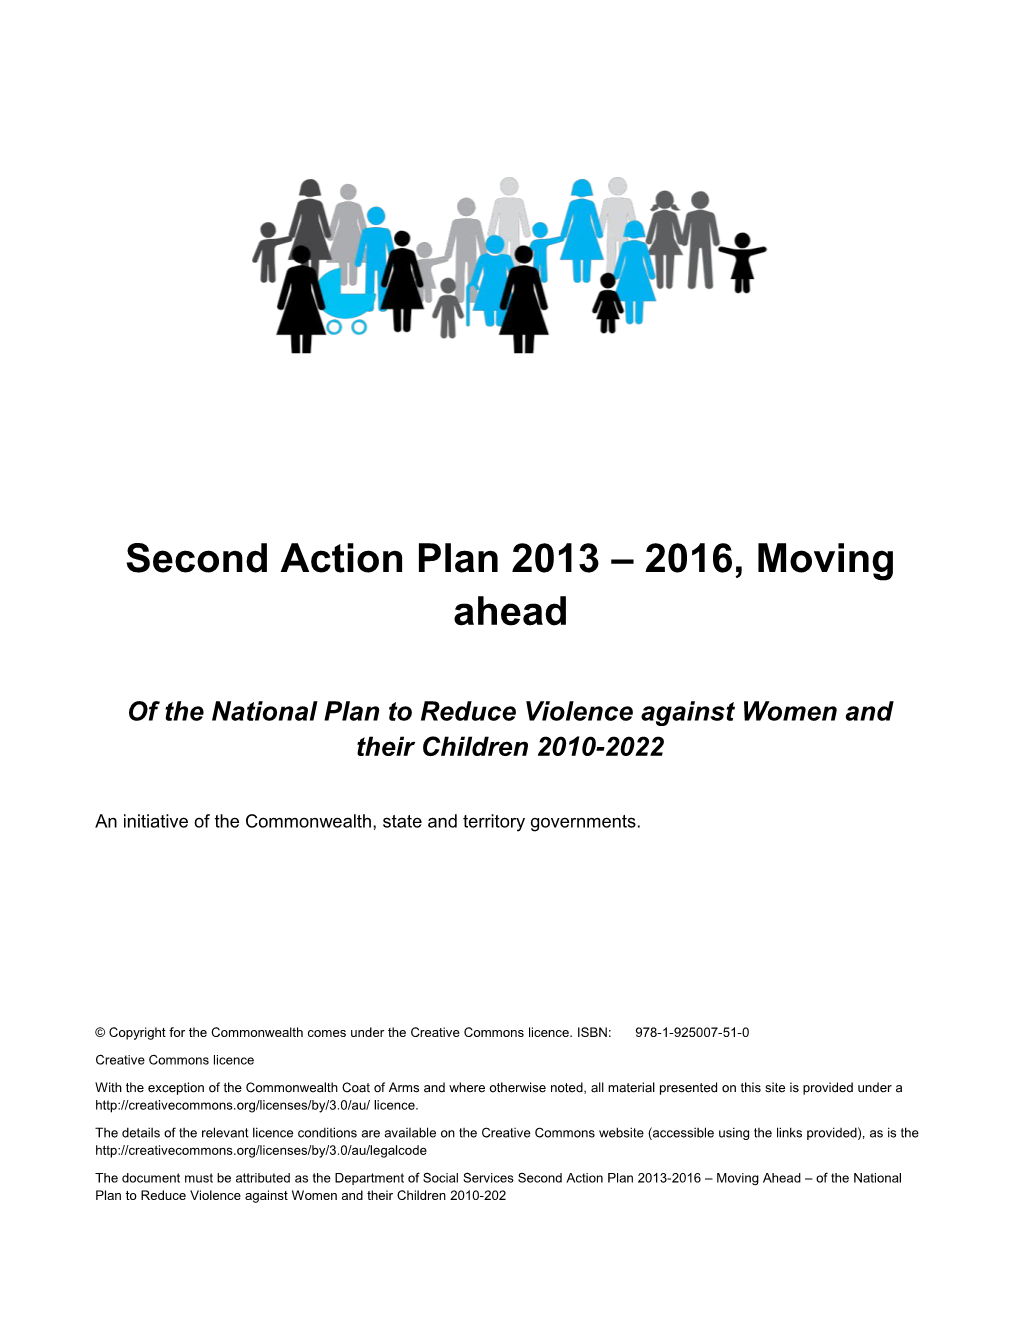 Second Action Plan 2013 2016, Moving Ahead